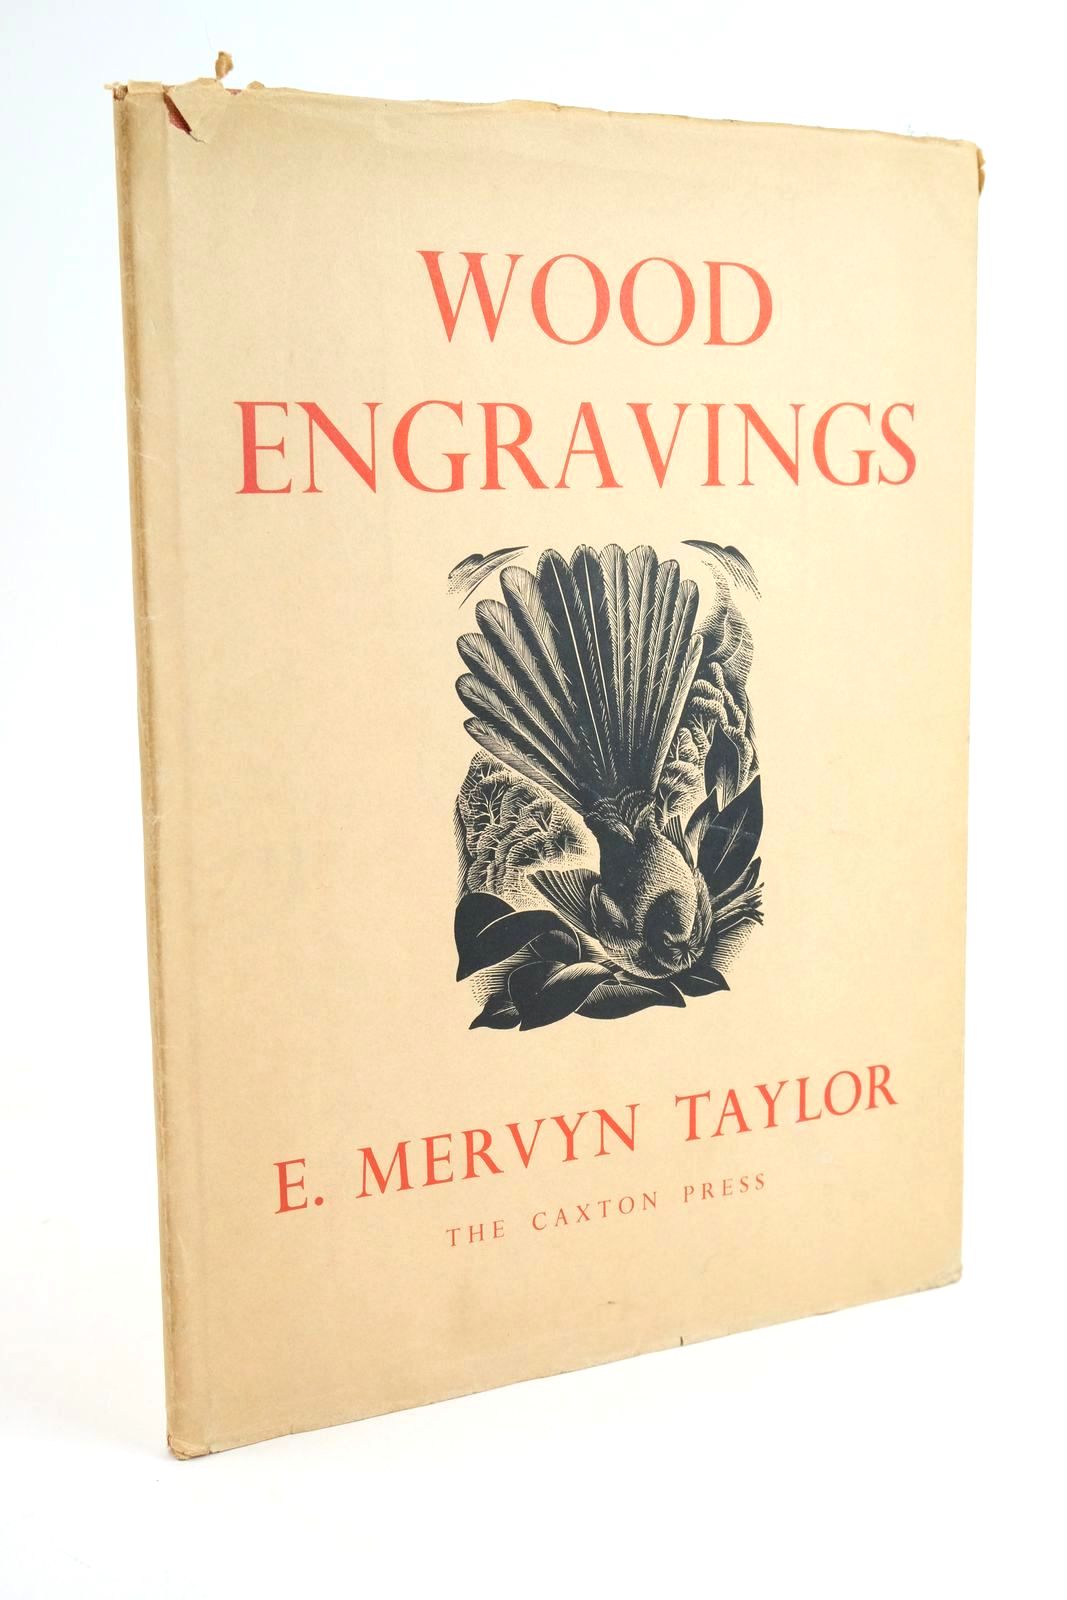 Photo of A BOOK OF WOOD ENGRAVINGS illustrated by Taylor, E. Mervyn published by Caxton Press (STOCK CODE: 1323525)  for sale by Stella & Rose's Books